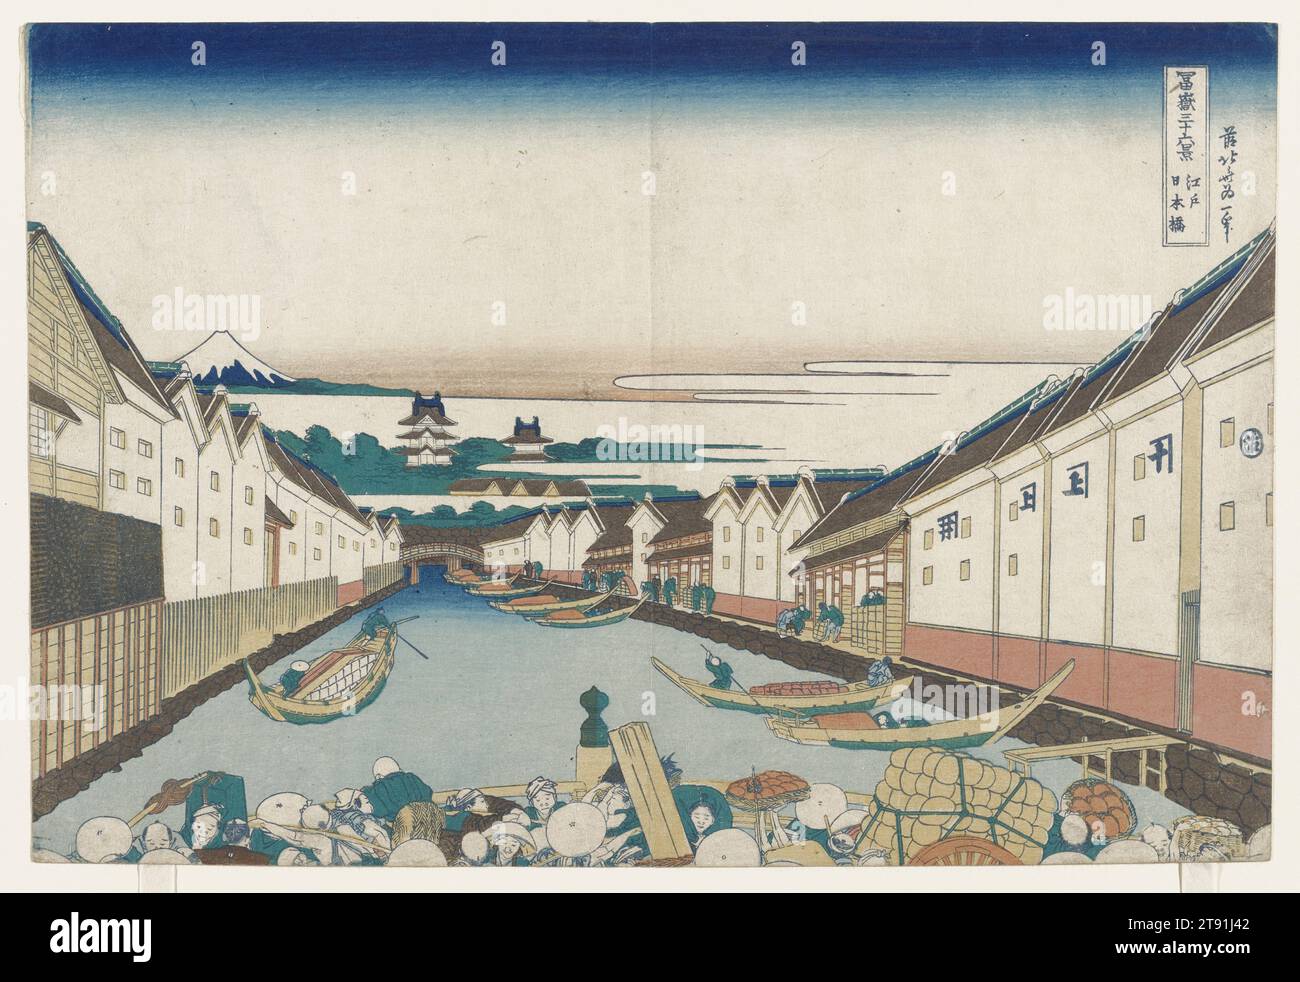 Nihonbashi Bridge in Edo, 1830-1833, Katsushika Hokusai; Publisher: Nishimuraya Yohachi, Japanese, 1760 - 1849, 10 × 14 13/16 in. (25.4 × 37.7 cm) (image, sheet, horizontal ōban), Woodblock print (nishiki-e); ink and color on paper, Japan, 19th century, Nihonbashi Bridge was not only the heart of the city of Edo, but also the terminus of the country's five major highways. It was always crowded with the travelers leaving the city or just arriving. The surrounding area was also a commercial center with all major retailers maintaining shops and warehouses near the bridge Stock Photo